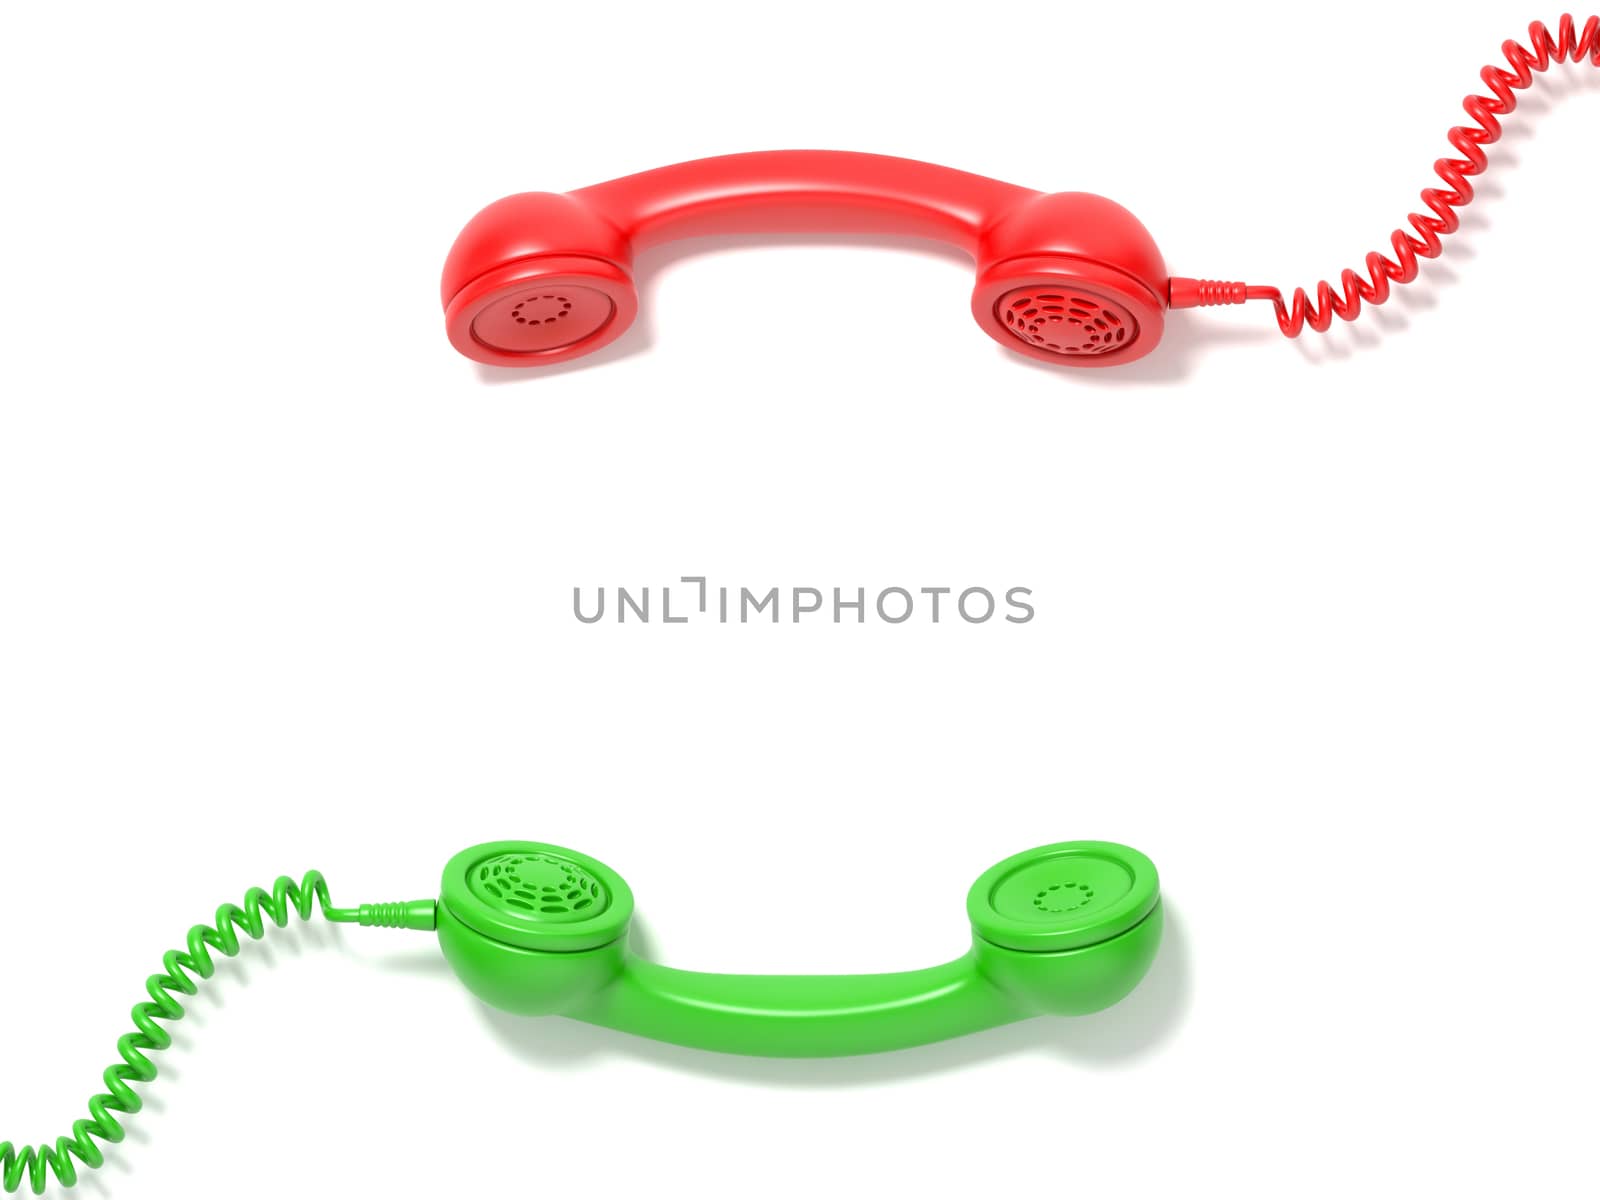 Retro red and green phone receivers lie opposite each other. 3D render illustration isolated on white background